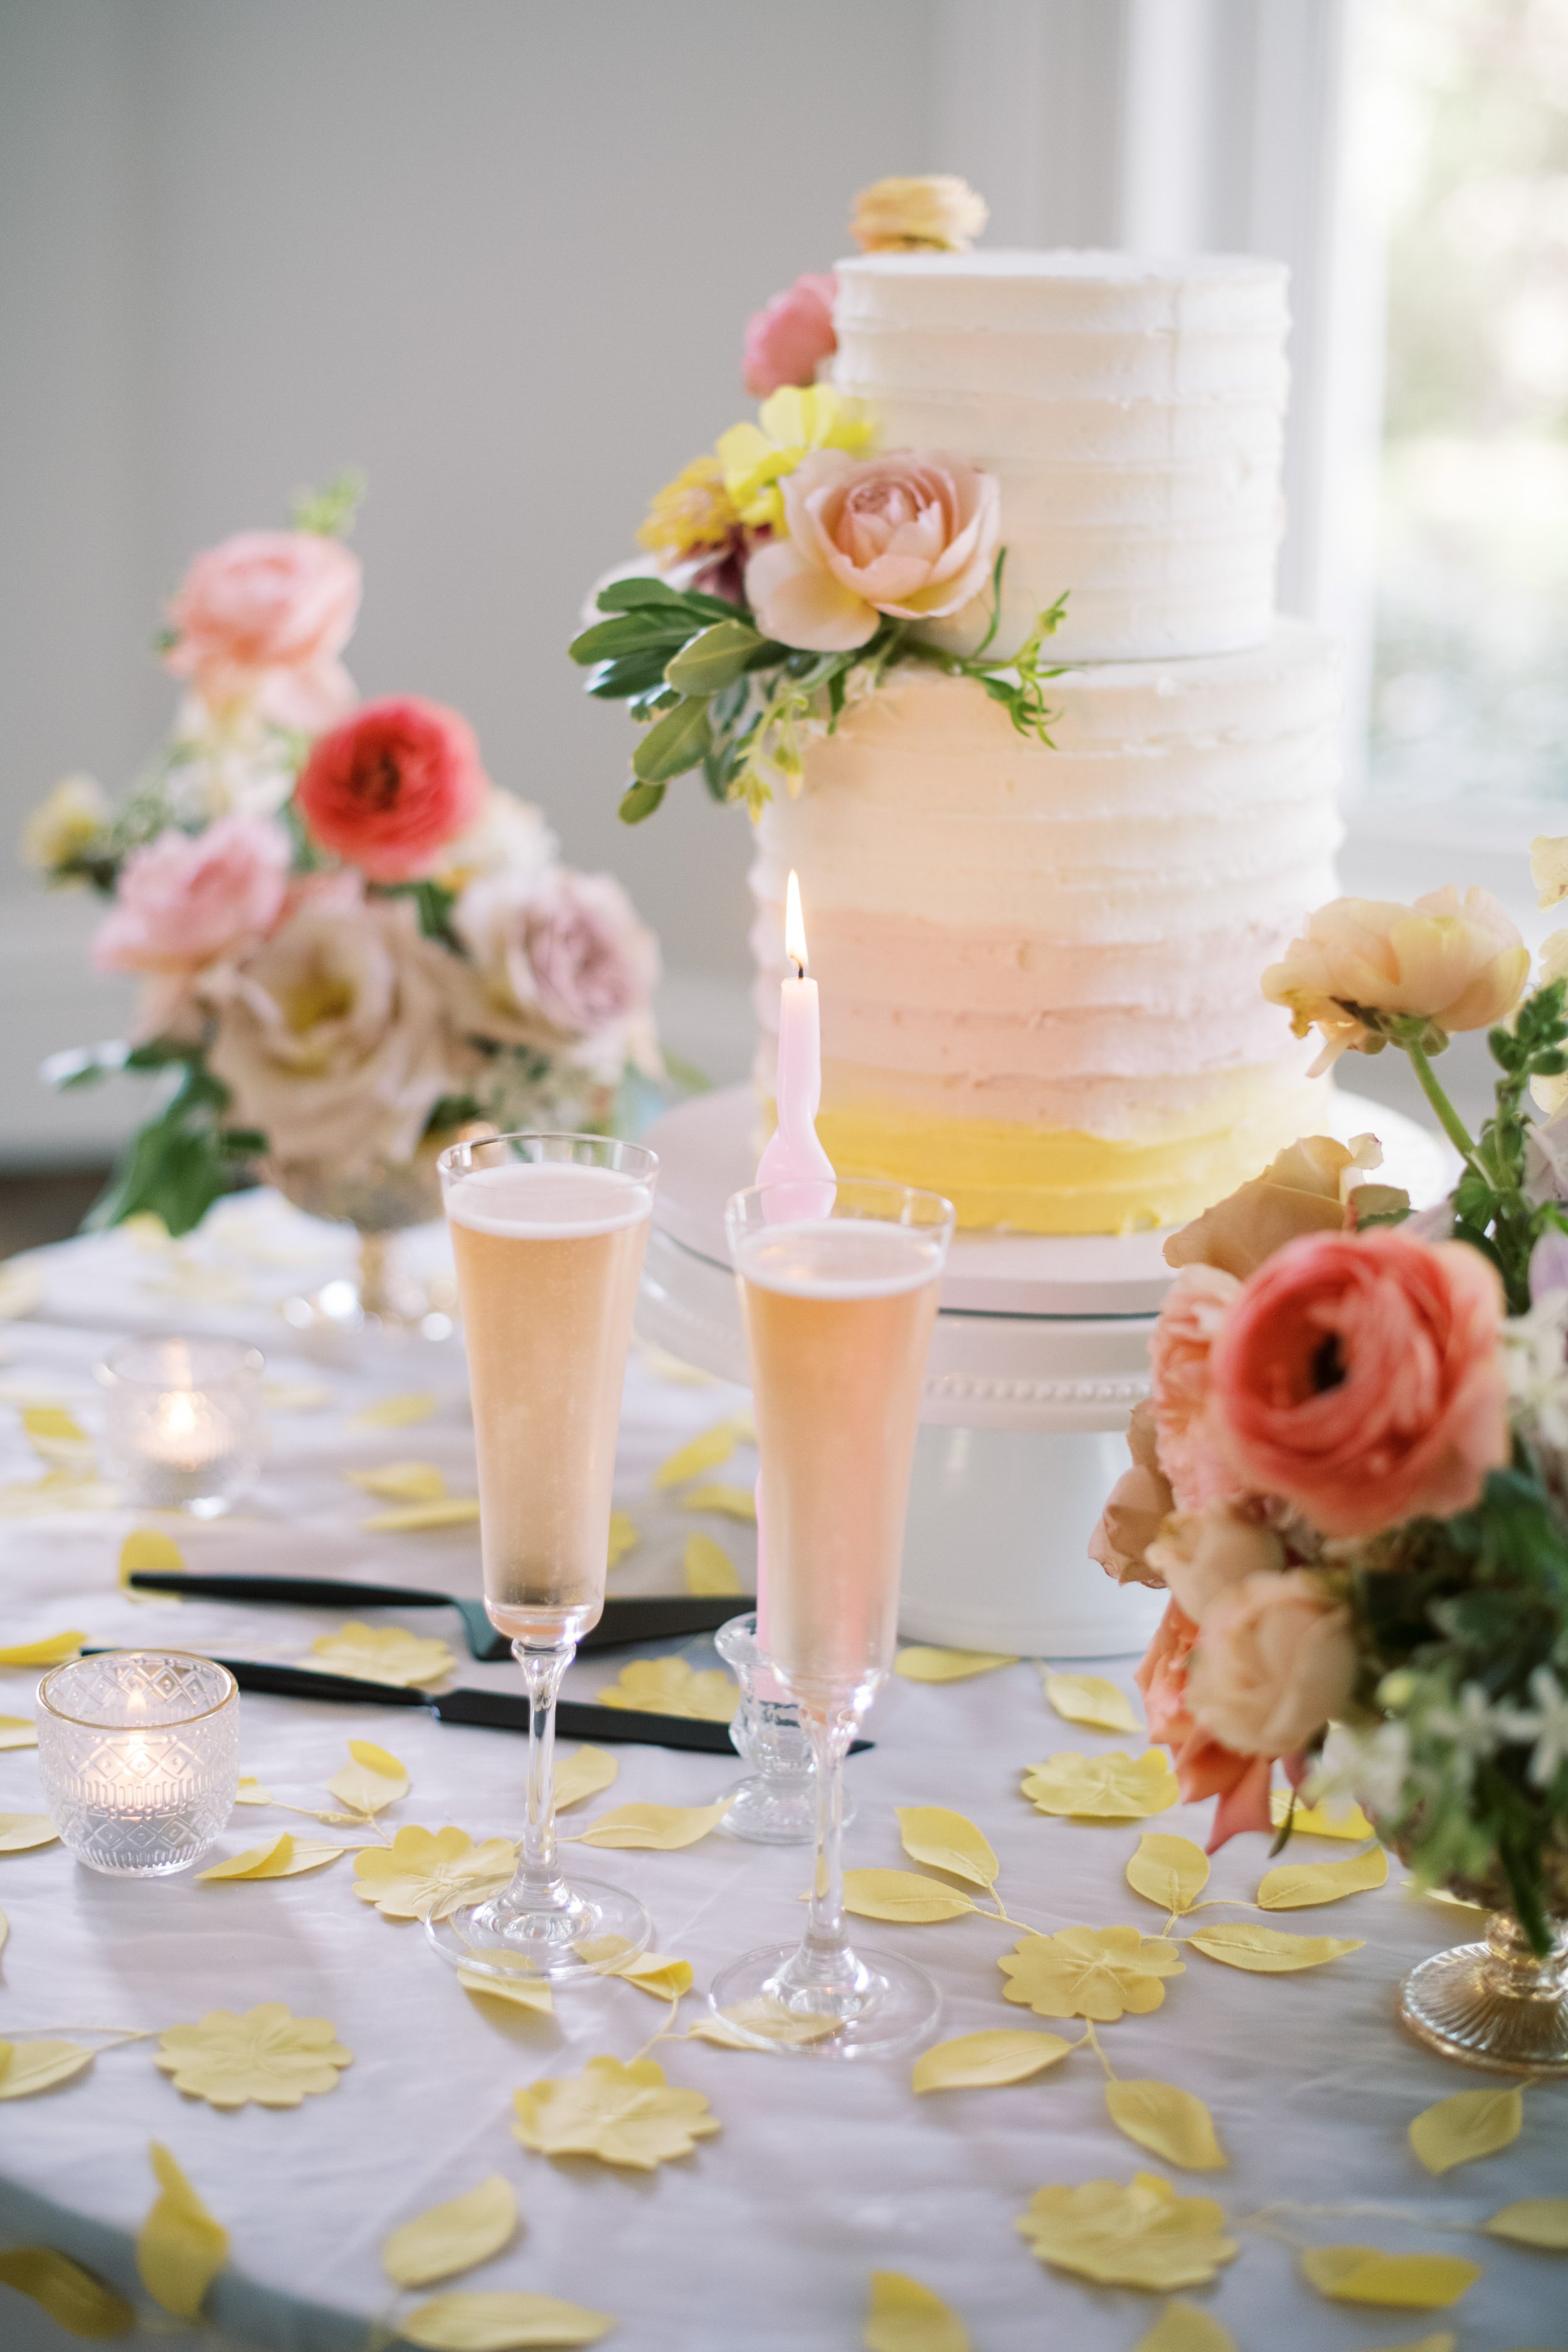 Summer Cake Sugar Euphoria at The McAlister-Leftwich House Wedding Venue Fancy This Photography